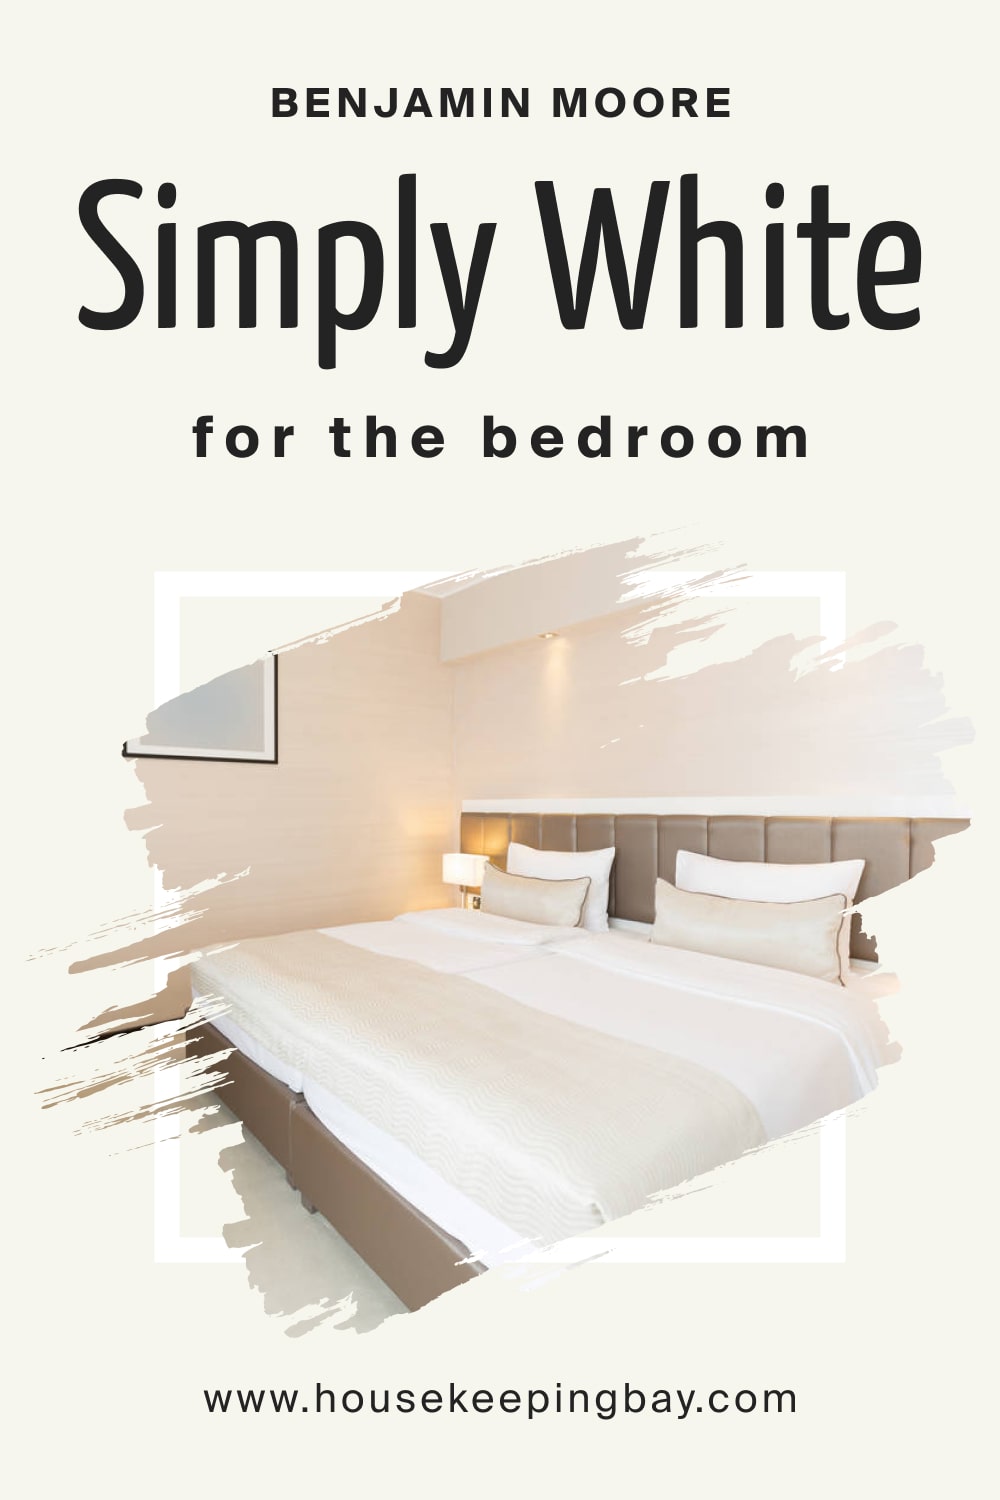 Benjamin Moore. Simply White OC 117 for the Bedroom